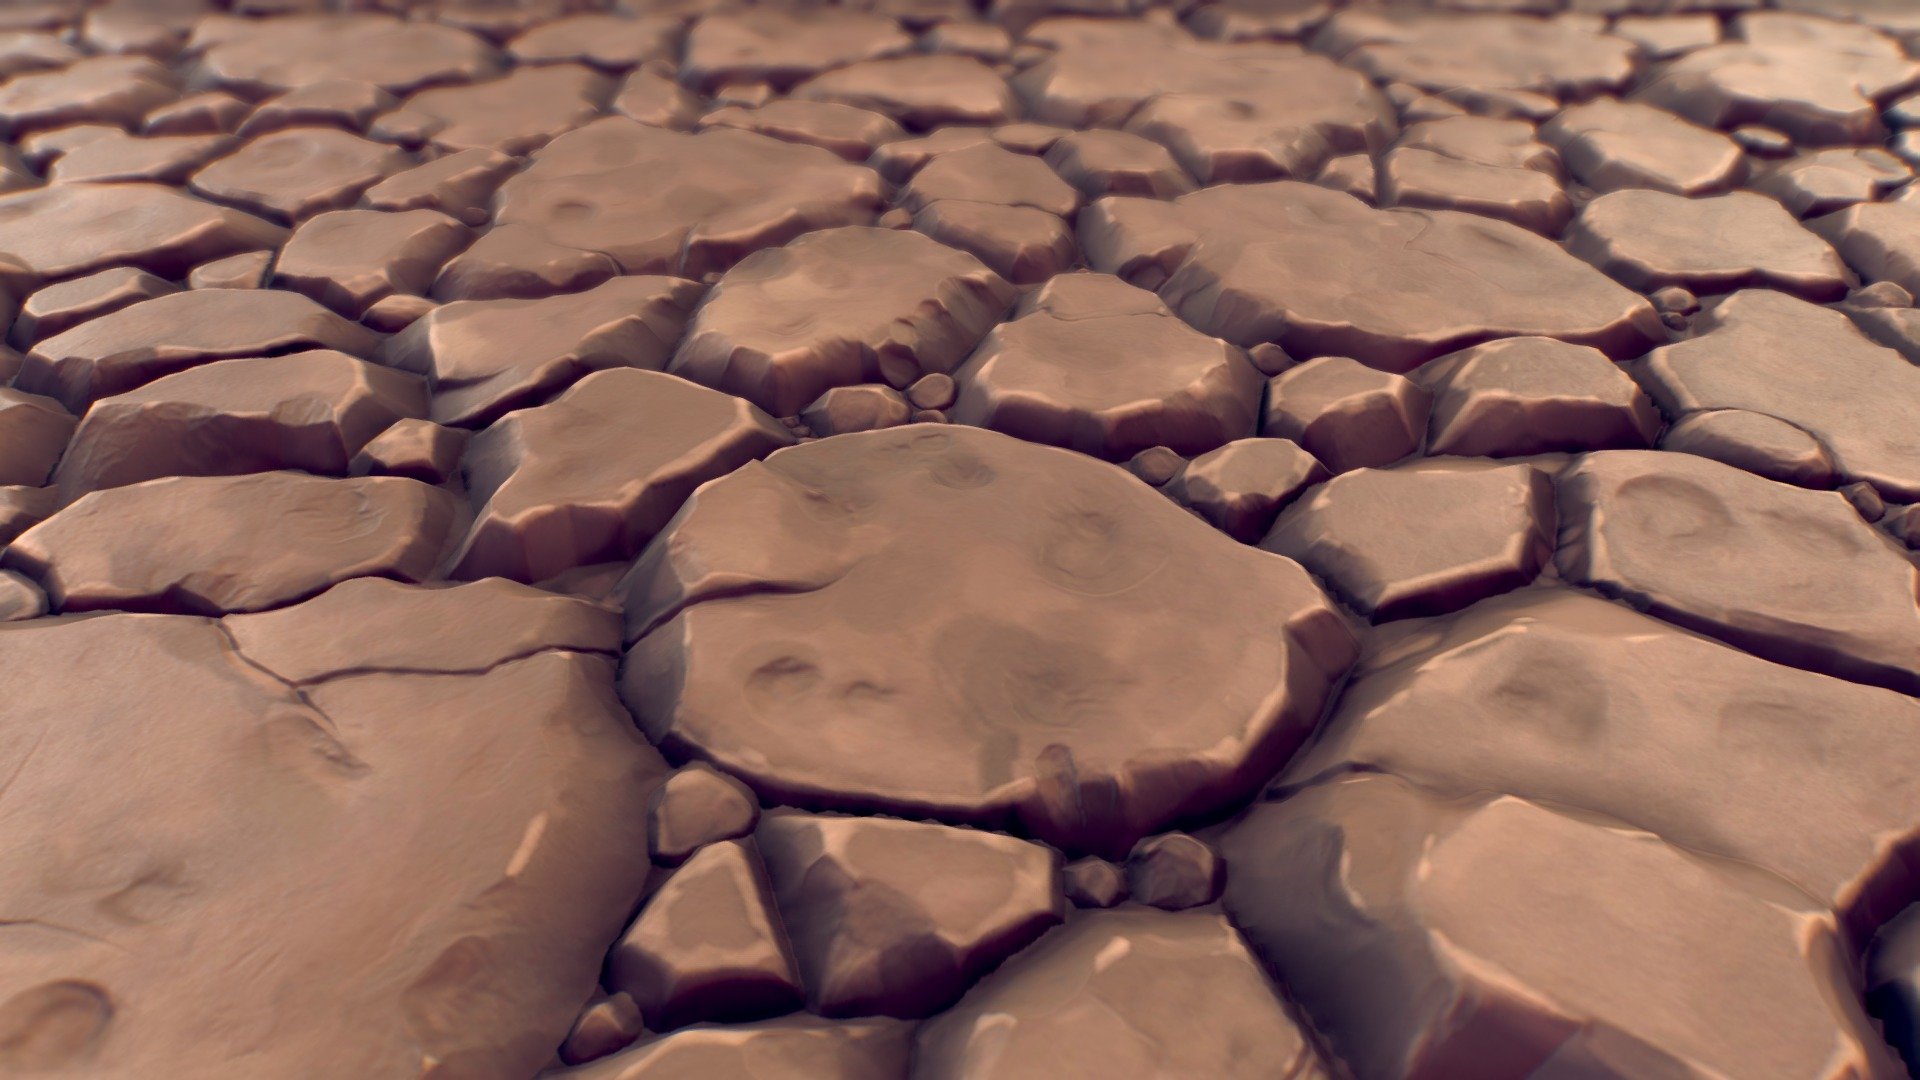 A stylized, dry, brown, cracked earth PBR texture for your game project. All texture maps included are 2048x2048 pixels.

Maps included are:




Color map

Normal map

Roughness map

Metal map

Height map

AO map
 - Desert Cracked Earth - PBR Series - Buy Royalty Free 3D model by BitGem 3d model